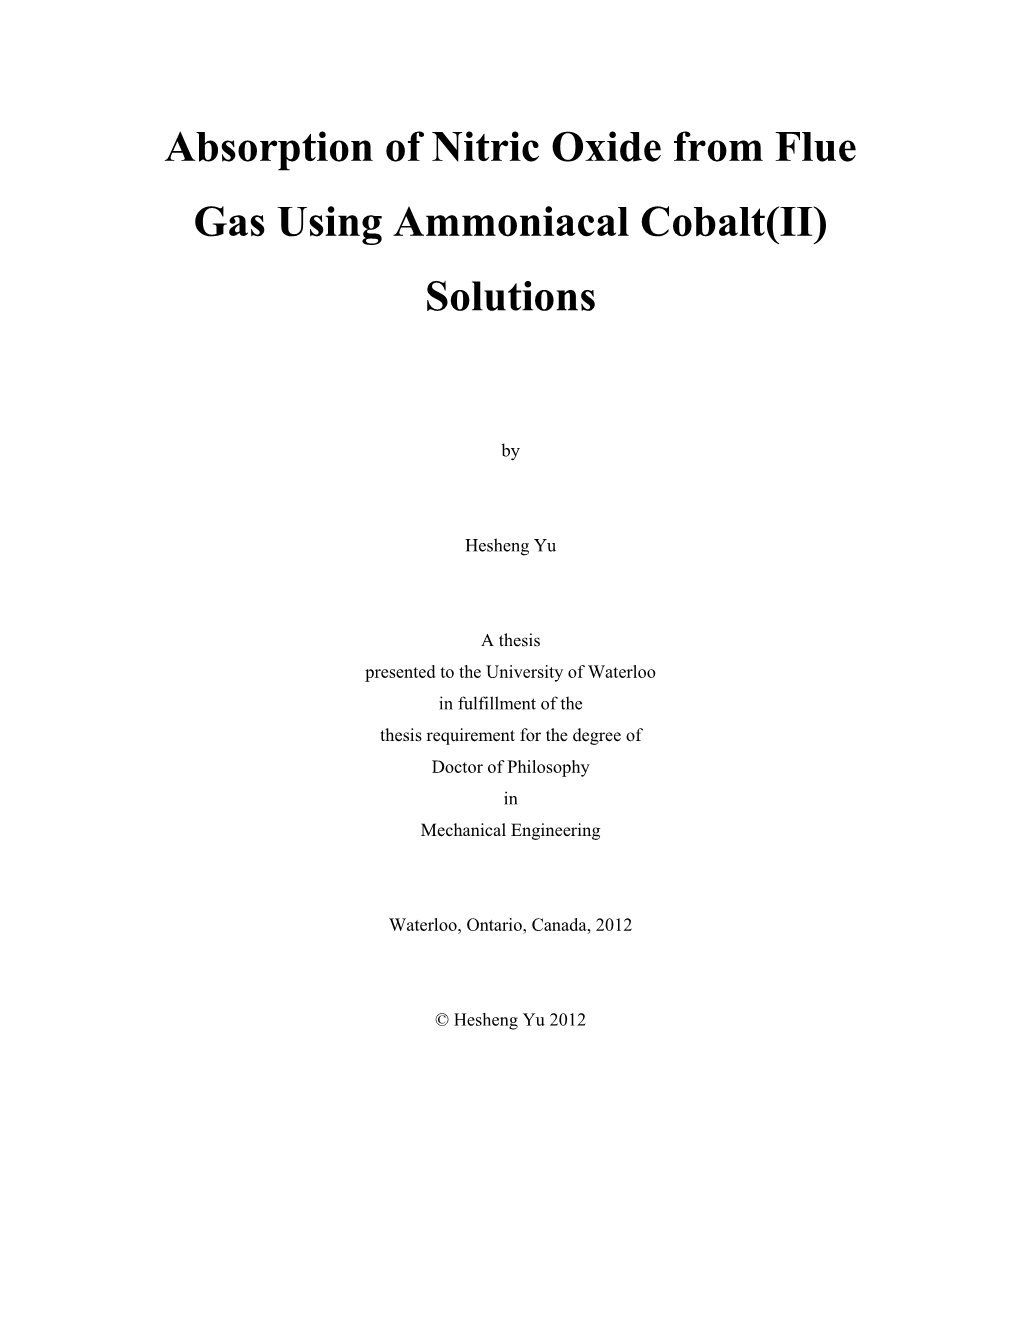 Absorption of Nitric Oxide from Flue Gas Using Ammoniacal Cobalt(II) Solutions